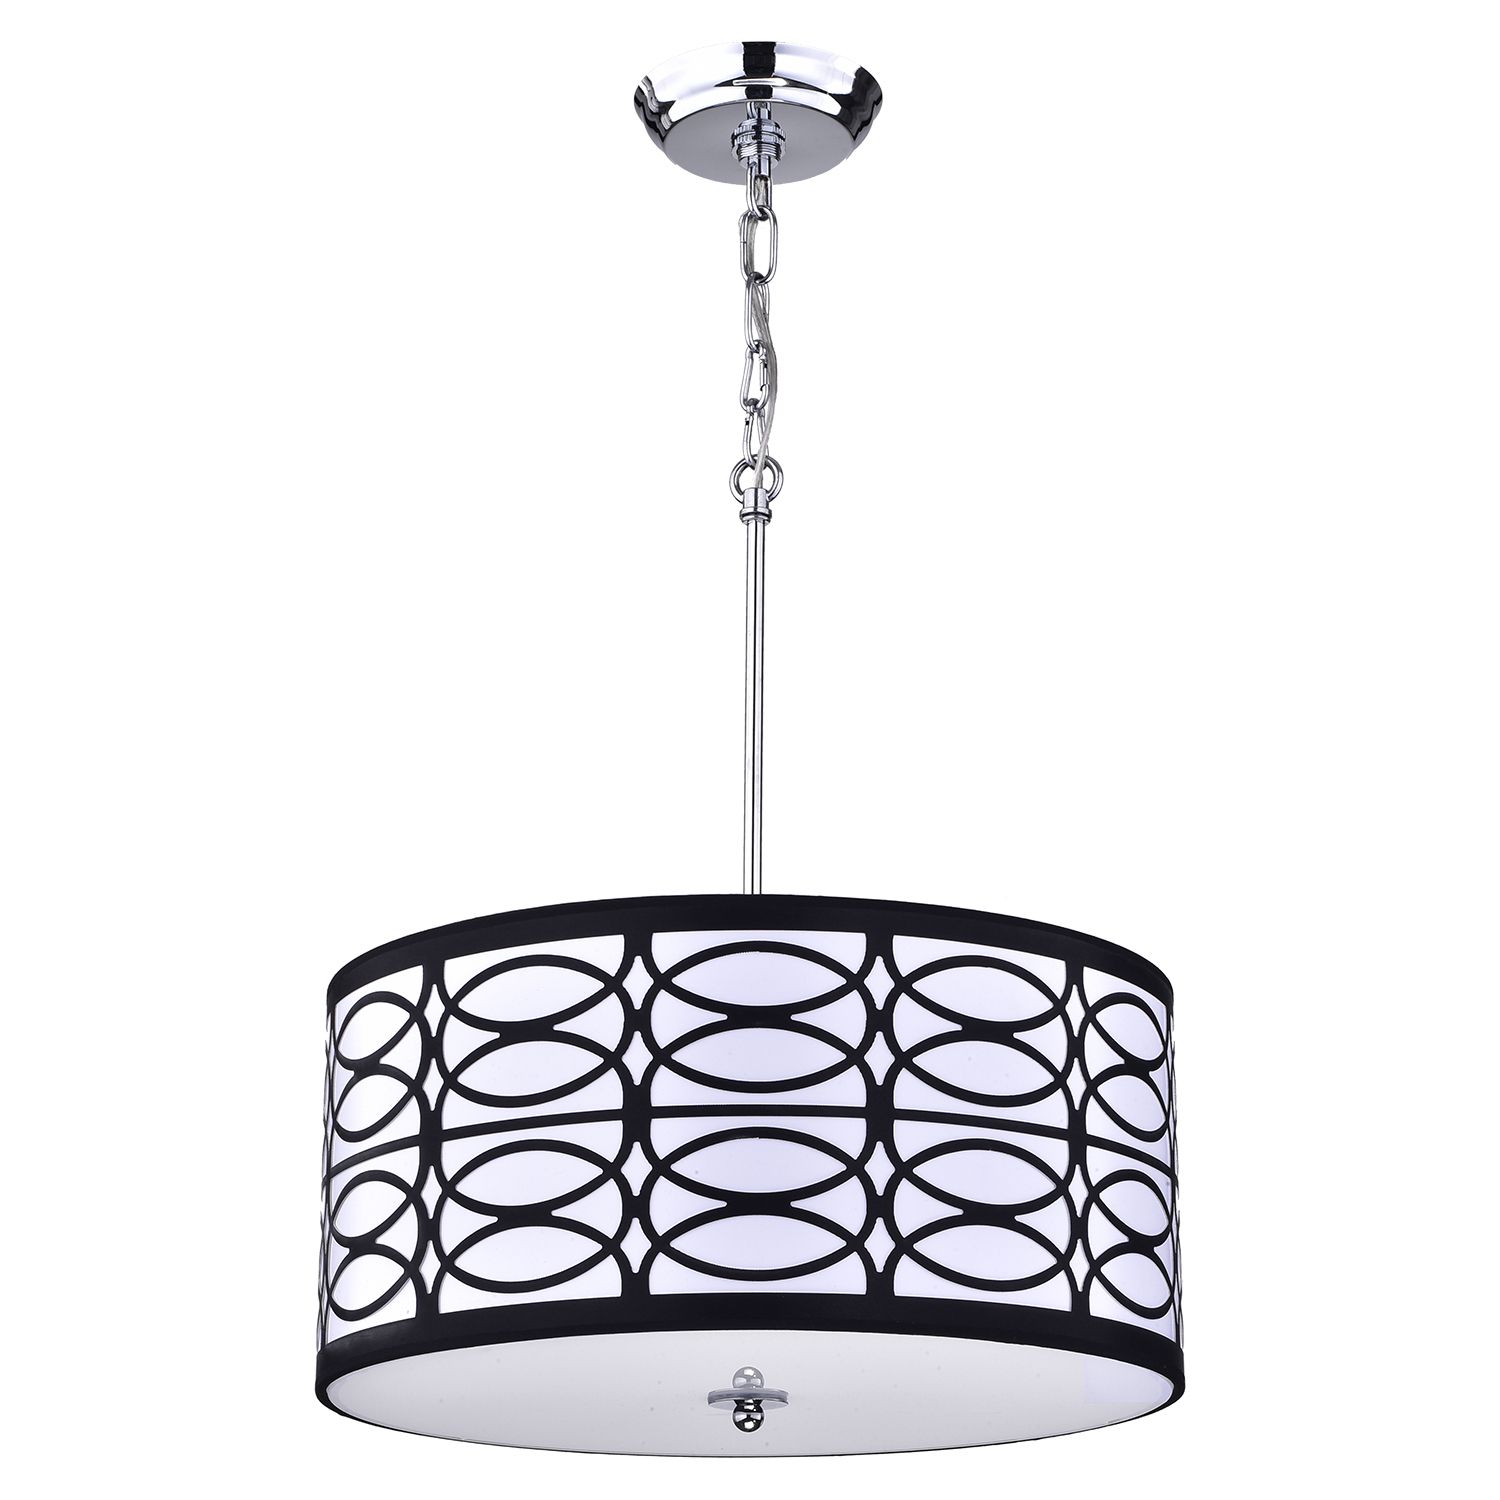 4 Light Chrome Finish With Black And White Round Drum With Black Shade Chandeliers (View 14 of 15)